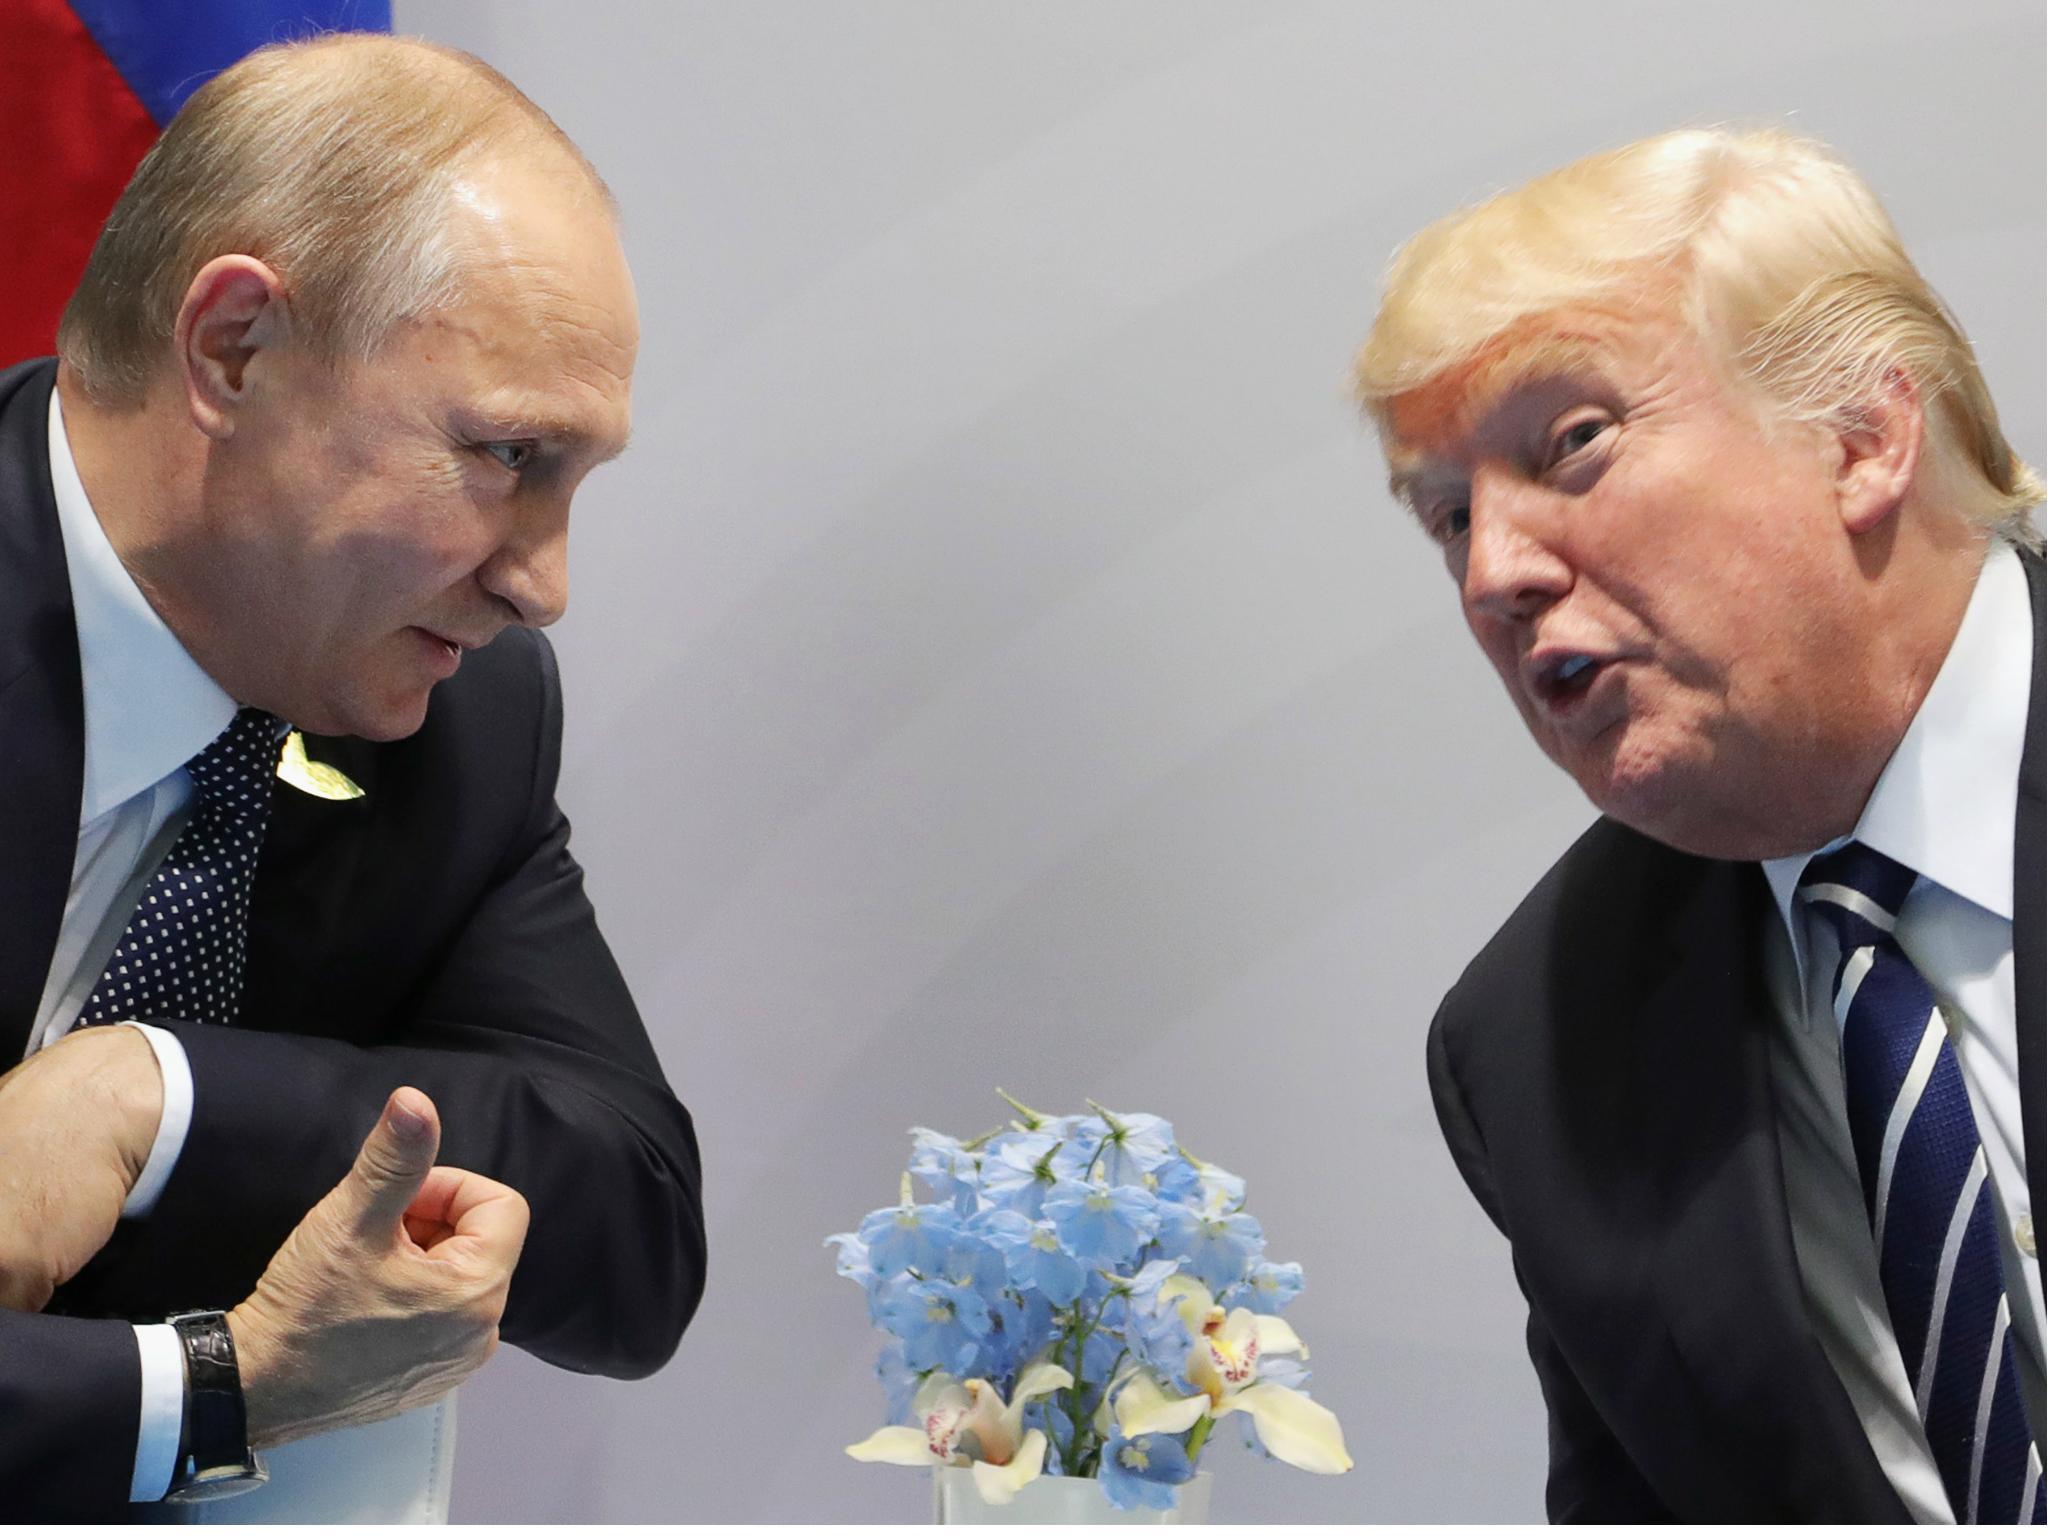 Donald Trump and Vladimir Putin met at the G20 summit in Hamburg, Germany July 2017. Overall more countries trust the Russian leader in world affairs.